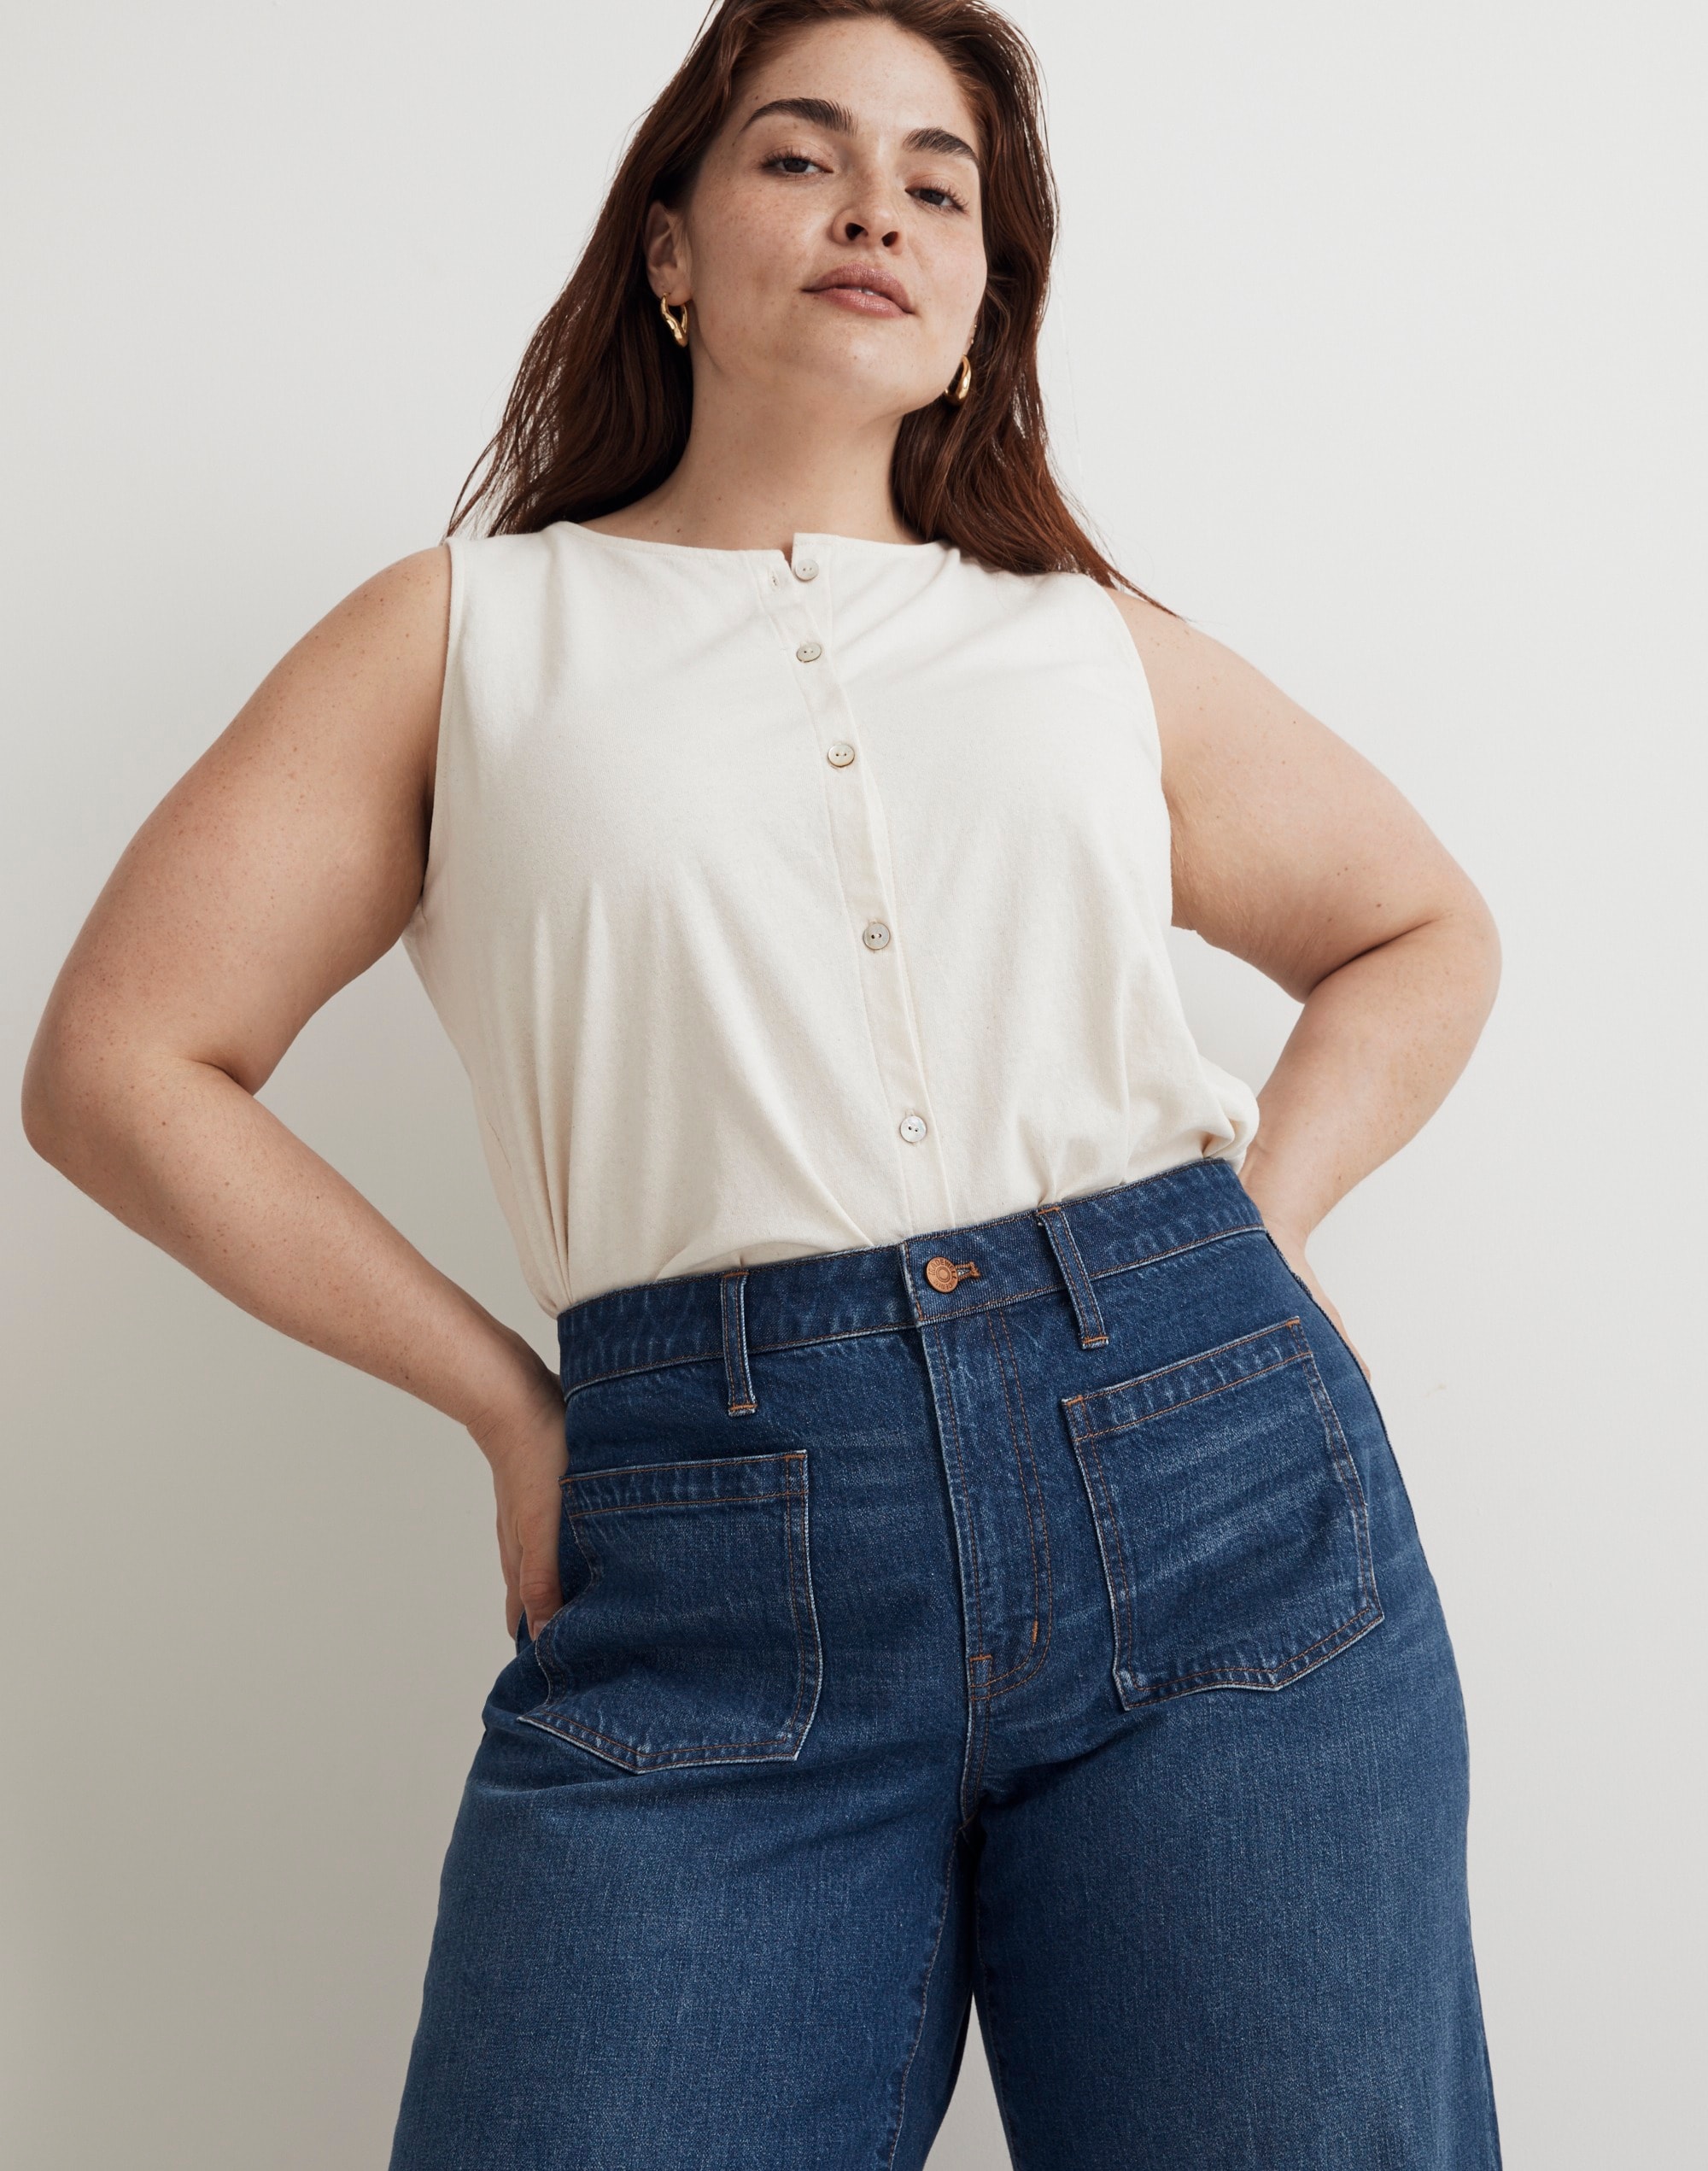 The Plus Perfect Vintage Wide-Leg Jean in Caronia Wash: Patch Pocket Edition